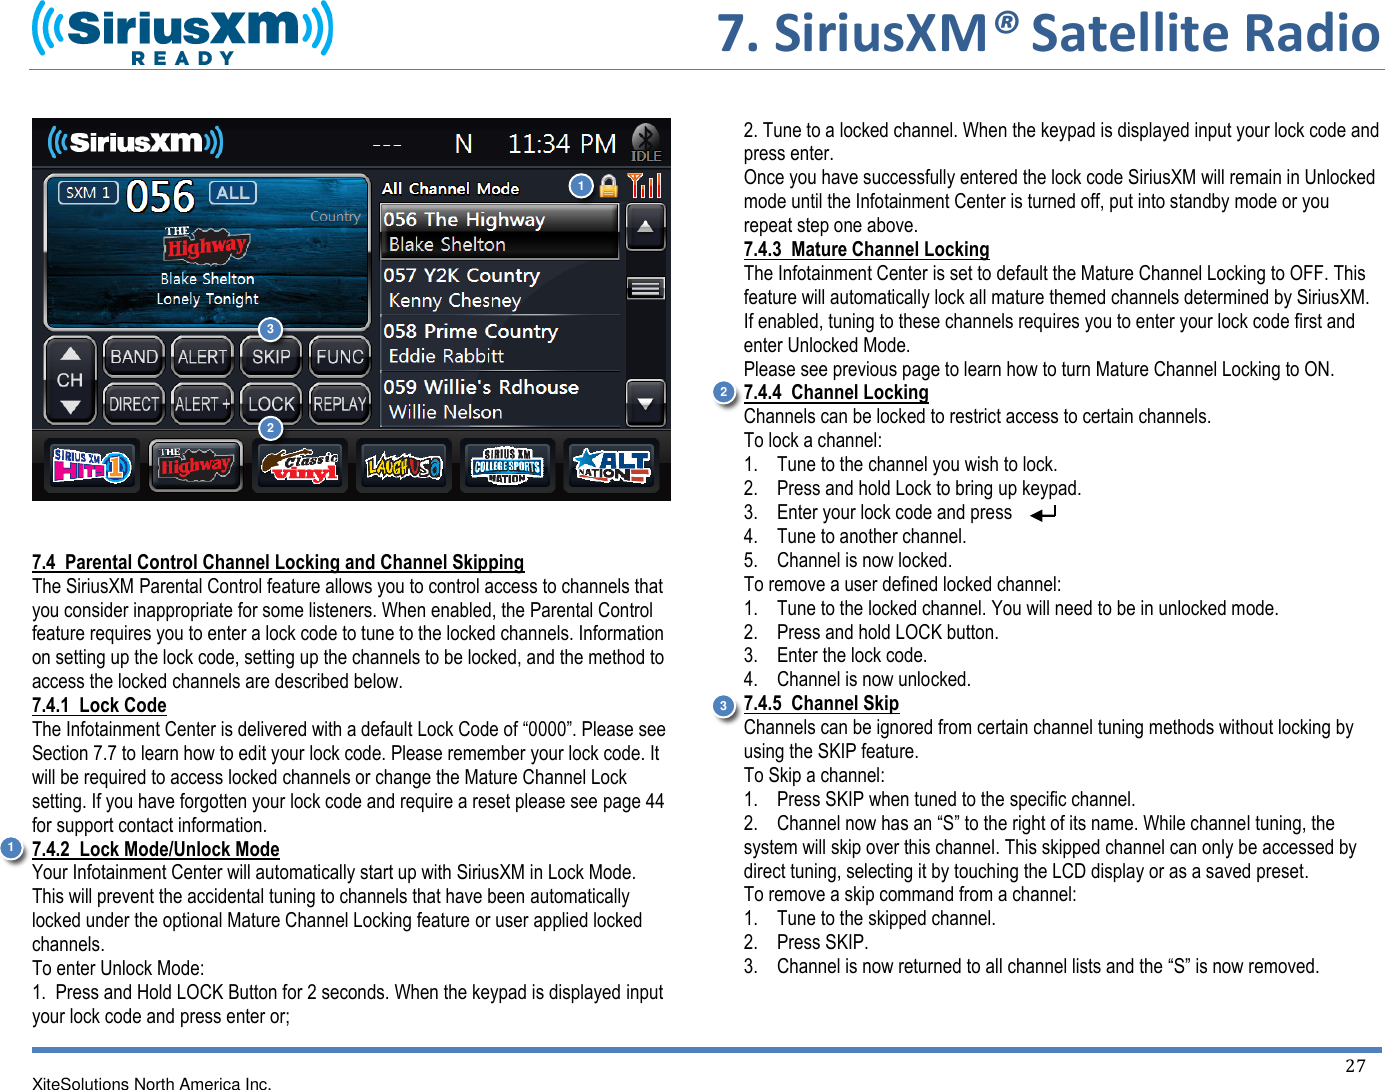     7. SiriusXM® Satellite Radio   XiteSolutions North America Inc.    27      7.4  Parental Control Channel Locking and Channel Skipping The SiriusXM Parental Control feature allows you to control access to channels that you consider inappropriate for some listeners. When enabled, the Parental Control feature requires you to enter a lock code to tune to the locked channels. Information on setting up the lock code, setting up the channels to be locked, and the method to access the locked channels are described below. 7.4.1  Lock Code The Infotainment Center is delivered with a default Lock Code of “0000”. Please see Section 7.7 to learn how to edit your lock code. Please remember your lock code. It will be required to access locked channels or change the Mature Channel Lock setting. If you have forgotten your lock code and require a reset please see page 44 for support contact information. 7.4.2  Lock Mode/Unlock Mode Your Infotainment Center will automatically start up with SiriusXM in Lock Mode. This will prevent the accidental tuning to channels that have been automatically locked under the optional Mature Channel Locking feature or user applied locked channels. To enter Unlock Mode: 1.  Press and Hold LOCK Button for 2 seconds. When the keypad is displayed input your lock code and press enter or;   2. Tune to a locked channel. When the keypad is displayed input your lock code and press enter. Once you have successfully entered the lock code SiriusXM will remain in Unlocked mode until the Infotainment Center is turned off, put into standby mode or you repeat step one above. 7.4.3  Mature Channel Locking The Infotainment Center is set to default the Mature Channel Locking to OFF. This feature will automatically lock all mature themed channels determined by SiriusXM. If enabled, tuning to these channels requires you to enter your lock code first and enter Unlocked Mode. Please see previous page to learn how to turn Mature Channel Locking to ON.  7.4.4  Channel Locking Channels can be locked to restrict access to certain channels. To lock a channel: 1.    Tune to the channel you wish to lock. 2.    Press and hold Lock to bring up keypad. 3.    Enter your lock code and press 4.    Tune to another channel. 5.    Channel is now locked. To remove a user defined locked channel: 1.    Tune to the locked channel. You will need to be in unlocked mode.  2.    Press and hold LOCK button. 3.    Enter the lock code. 4.    Channel is now unlocked. 7.4.5  Channel Skip Channels can be ignored from certain channel tuning methods without locking by using the SKIP feature. To Skip a channel: 1.    Press SKIP when tuned to the specific channel. 2.    Channel now has an “S” to the right of its name. While channel tuning, the system will skip over this channel. This skipped channel can only be accessed by direct tuning, selecting it by touching the LCD display or as a saved preset. To remove a skip command from a channel: 1.    Tune to the skipped channel. 2.    Press SKIP. 3.    Channel is now returned to all channel lists and the “S” is now removed.1 2 3 1 2 3 